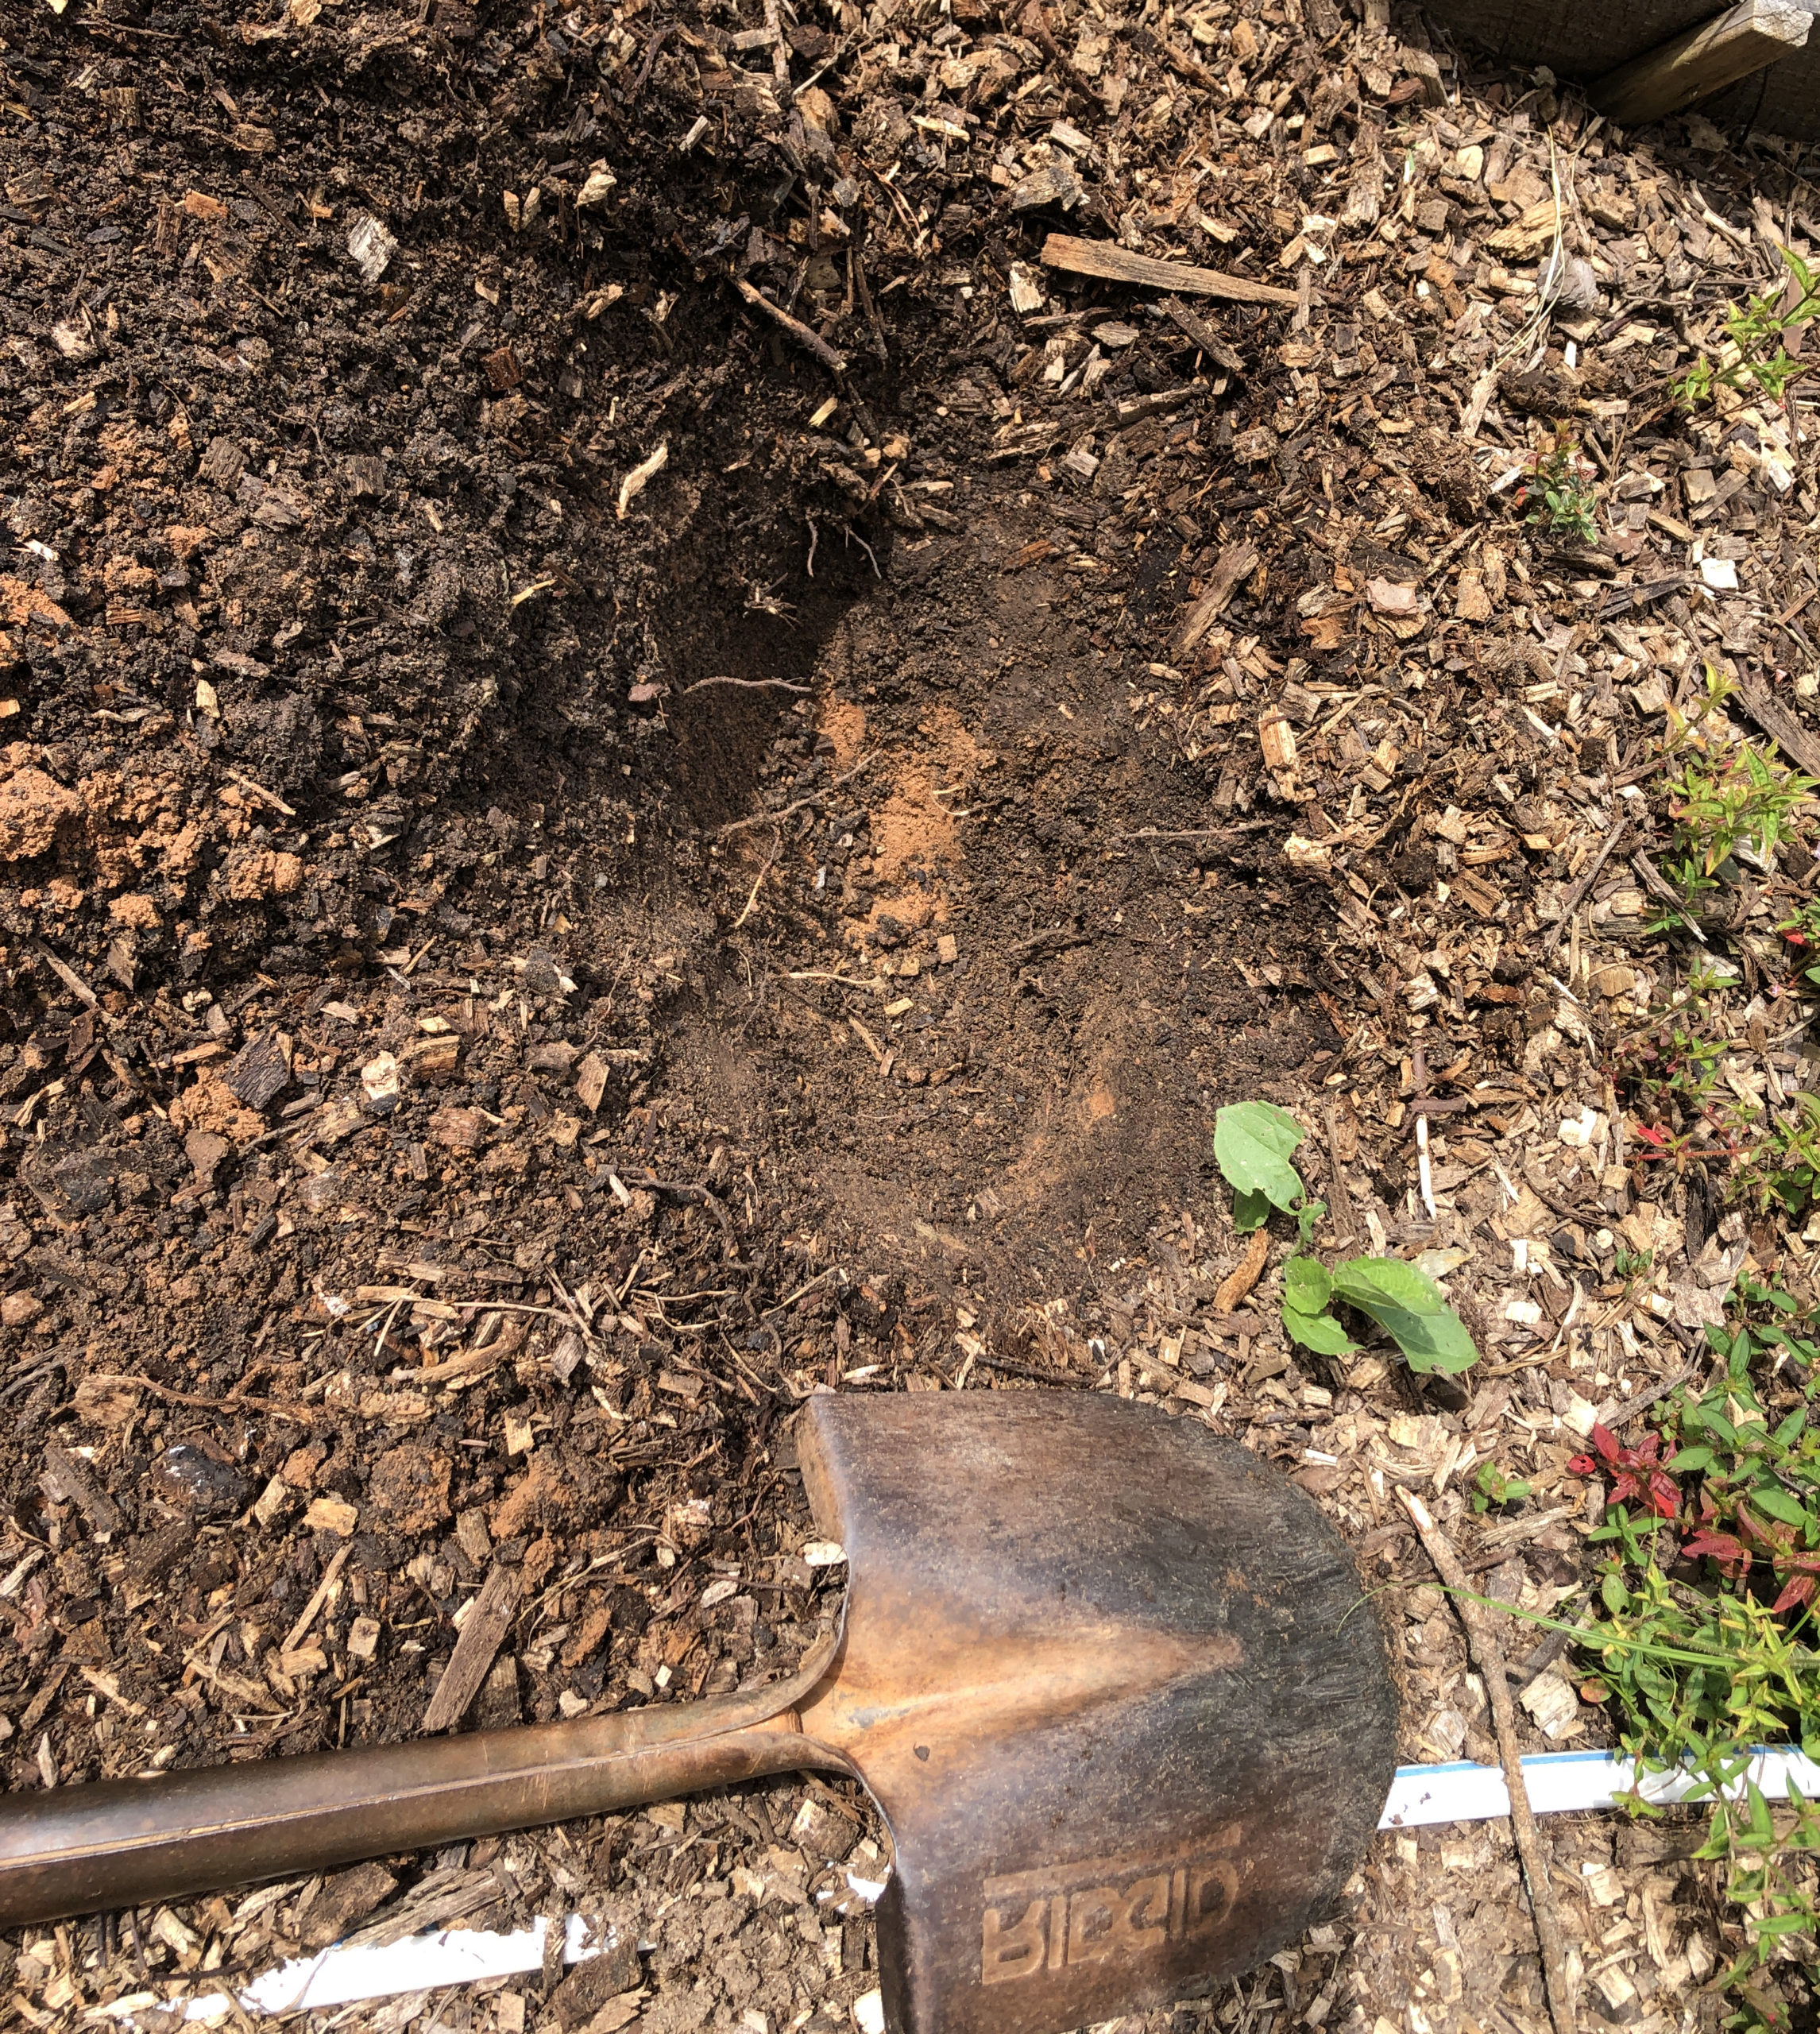 Amended soil in sunbeds, several years later, with a shovel for scale.